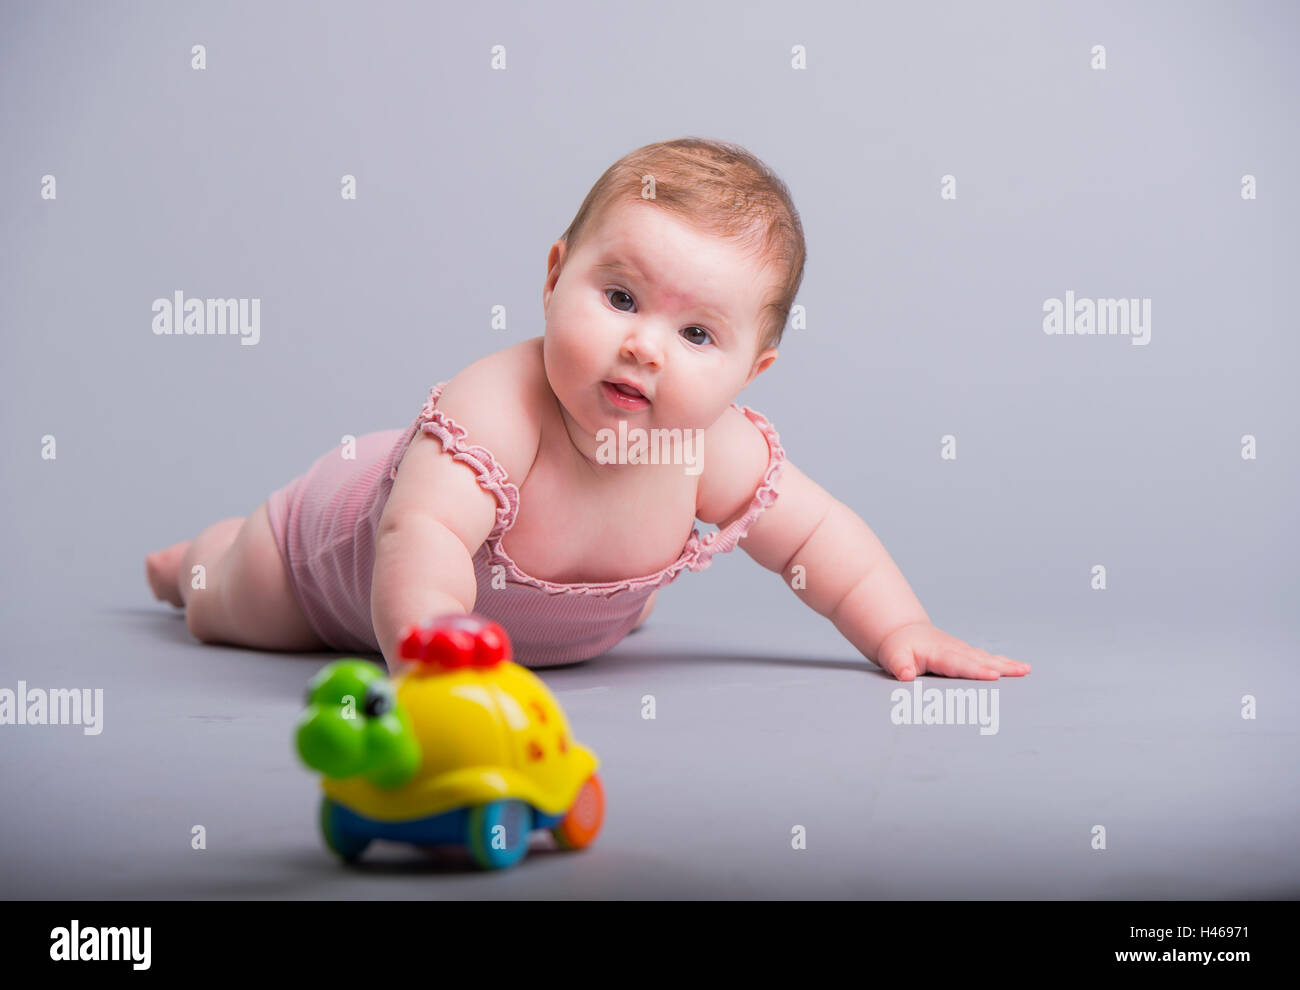 cute baby girl crawling on a gray floor, playing with a colorful toy Stock Photo